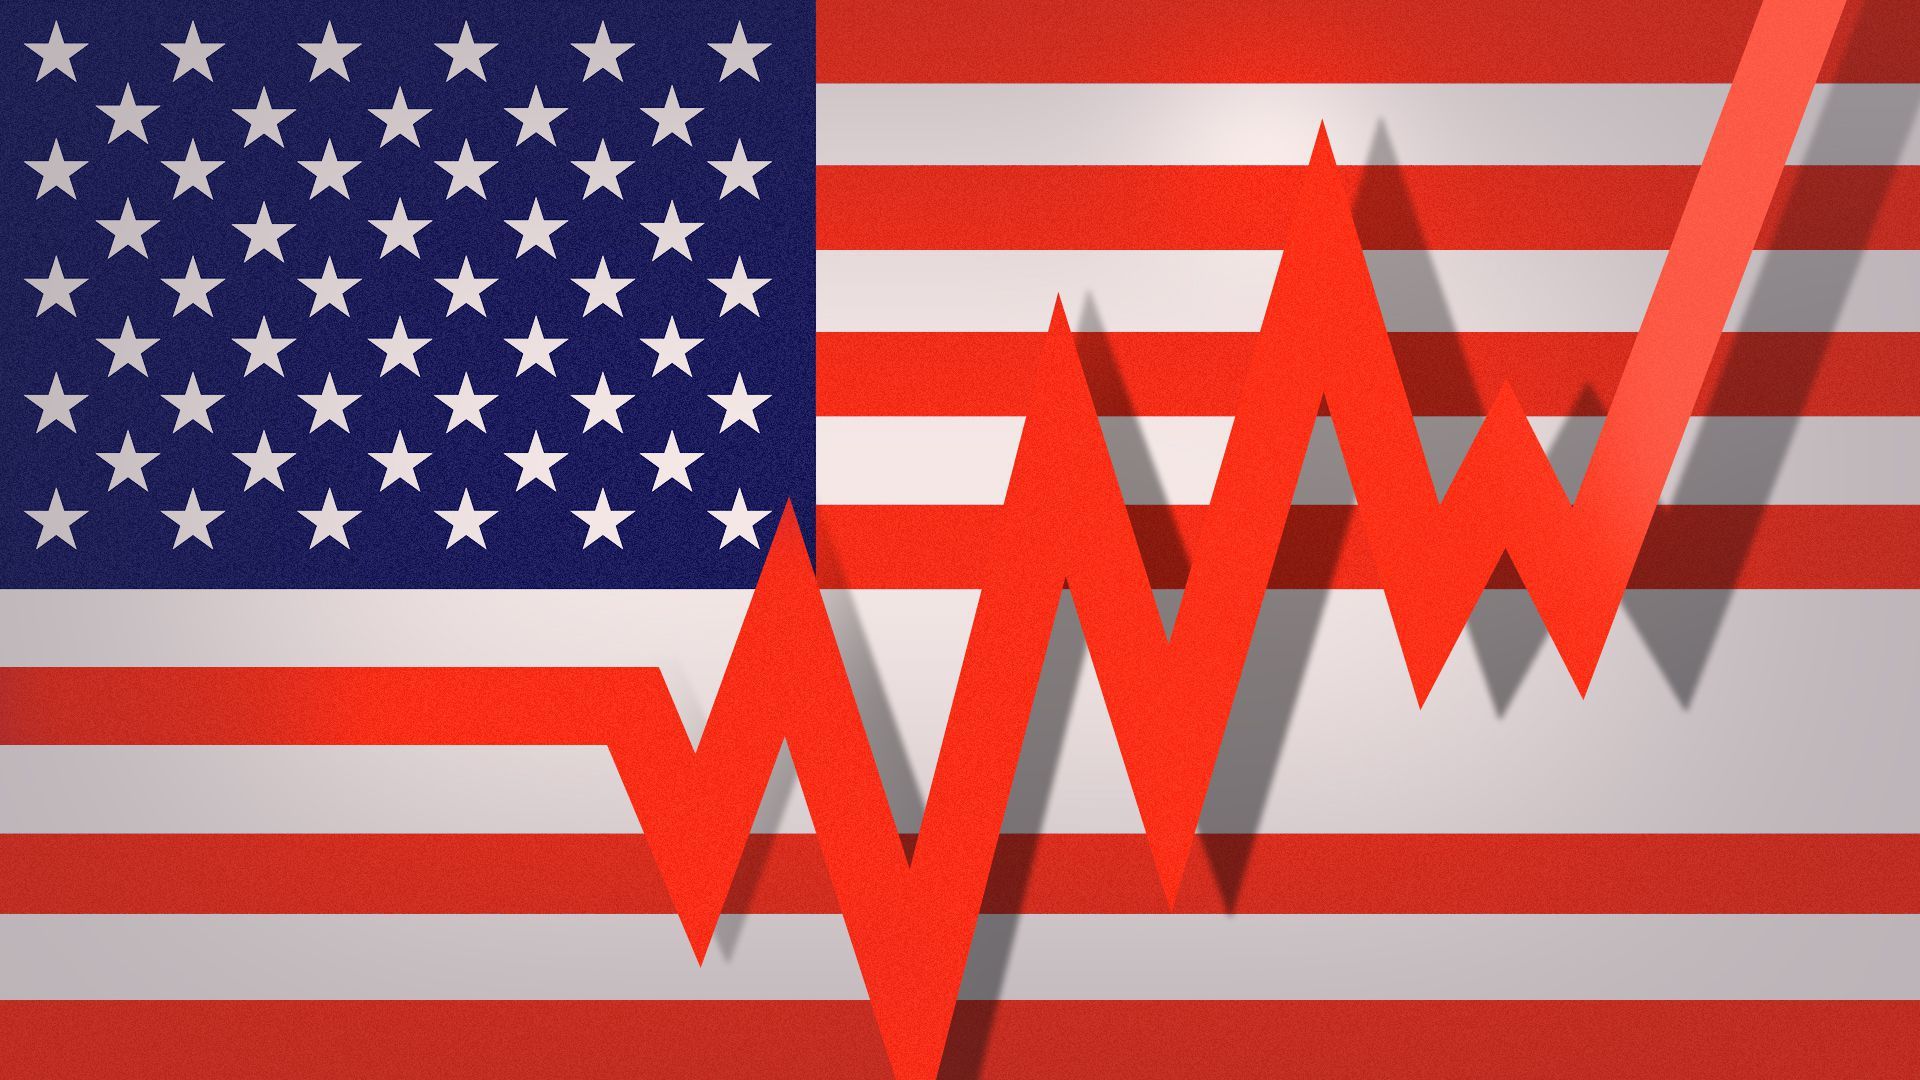 Illustration of a American flag with a stock line going up and down